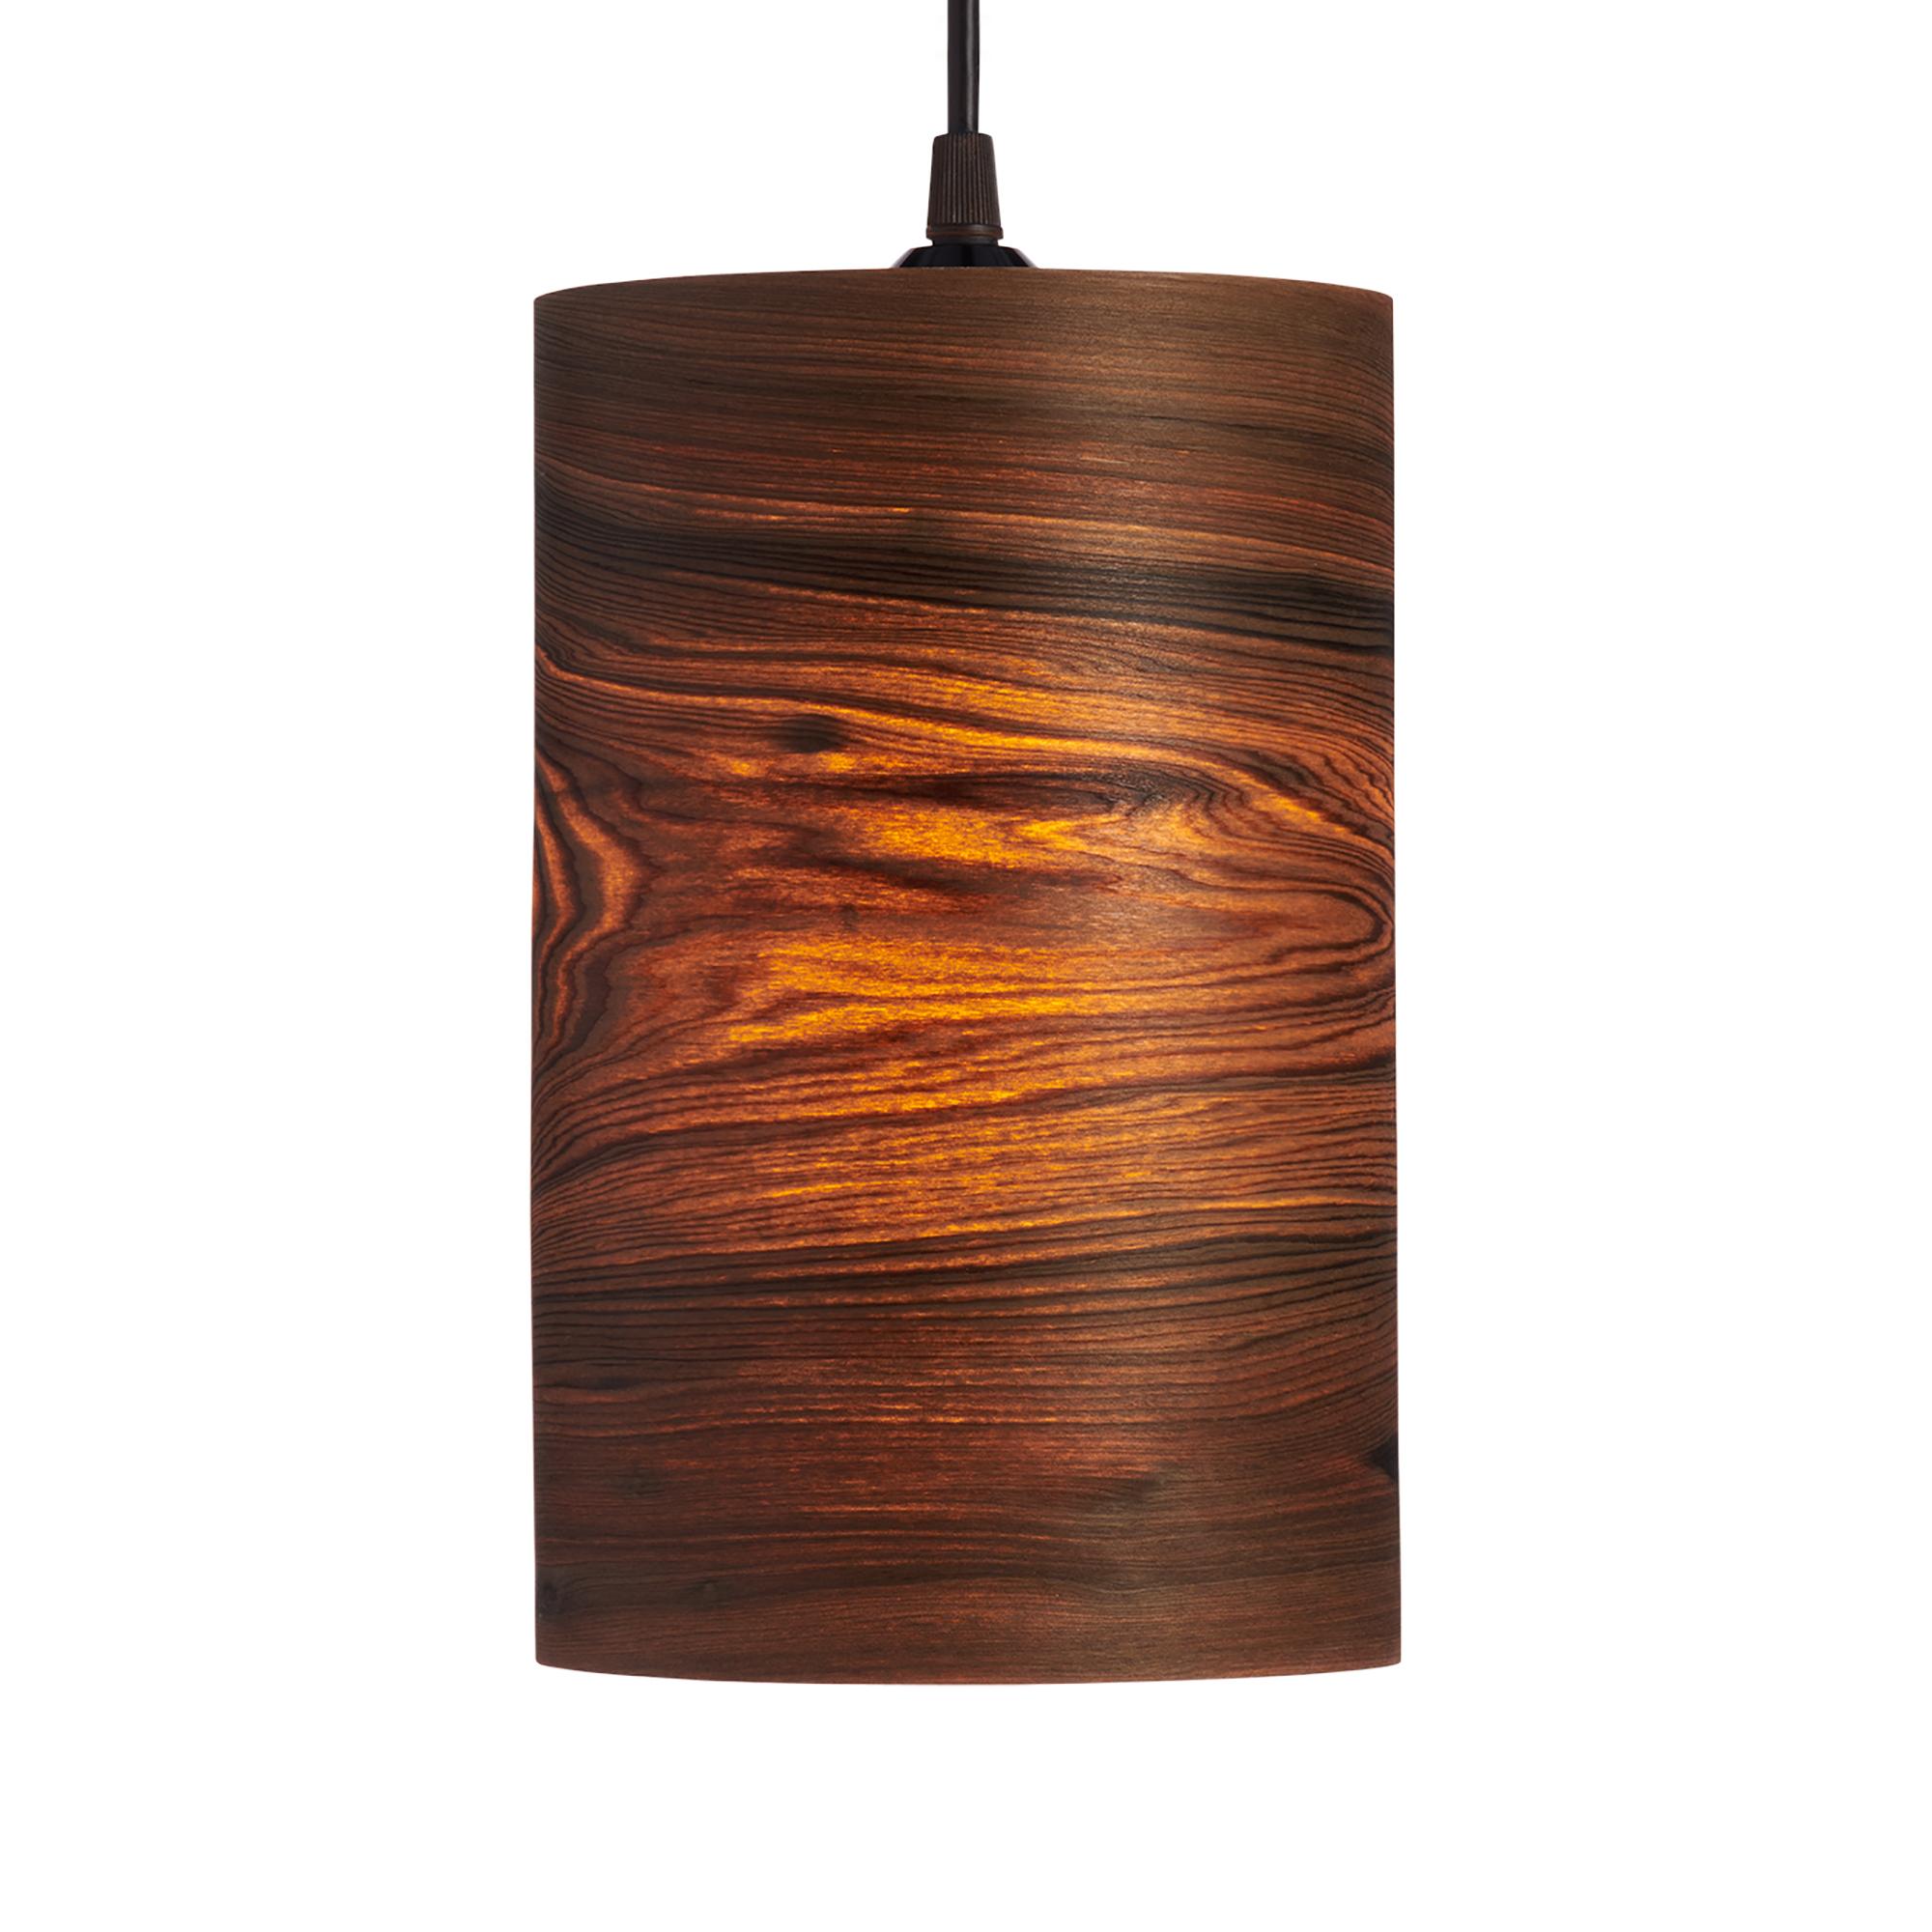 Centa is a contemporary, Mid-Century Modern light fixture. This is a minimalist luxury pendant design and can be exhibited in dining rooms, entryways, alcoves, and over kitchen islands. Made from Bogwood, a tree that has aged in a bog, lake, or